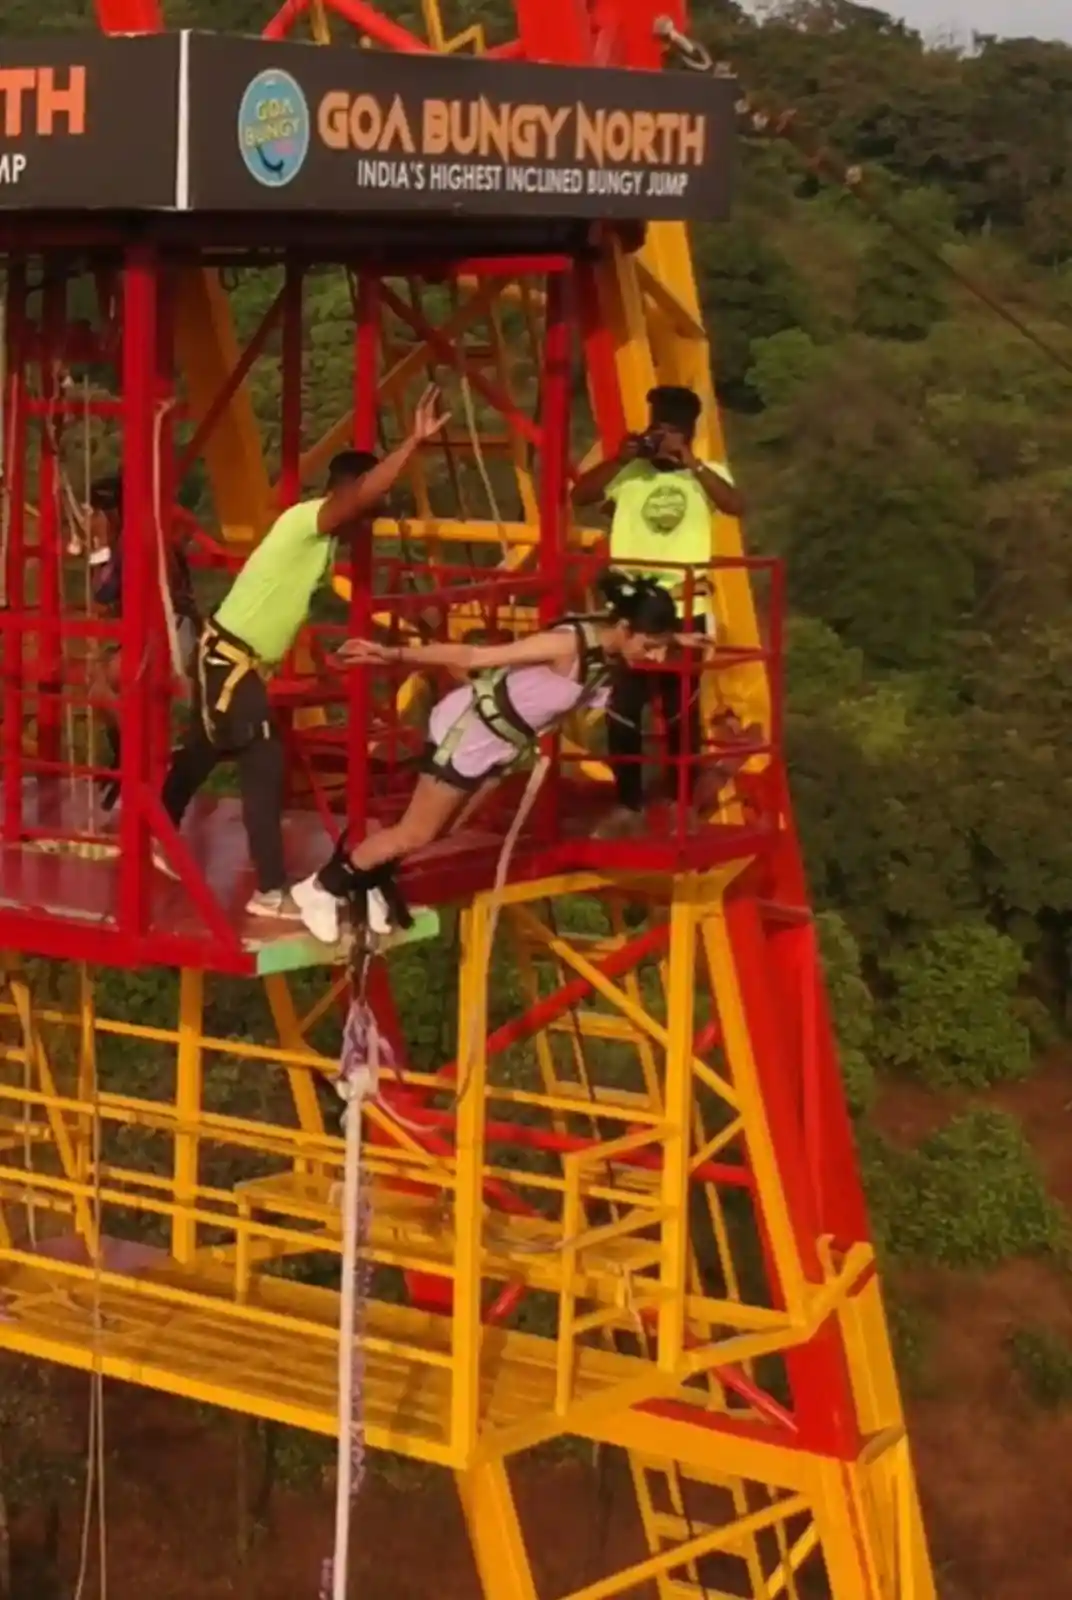 bungee jumping at goa